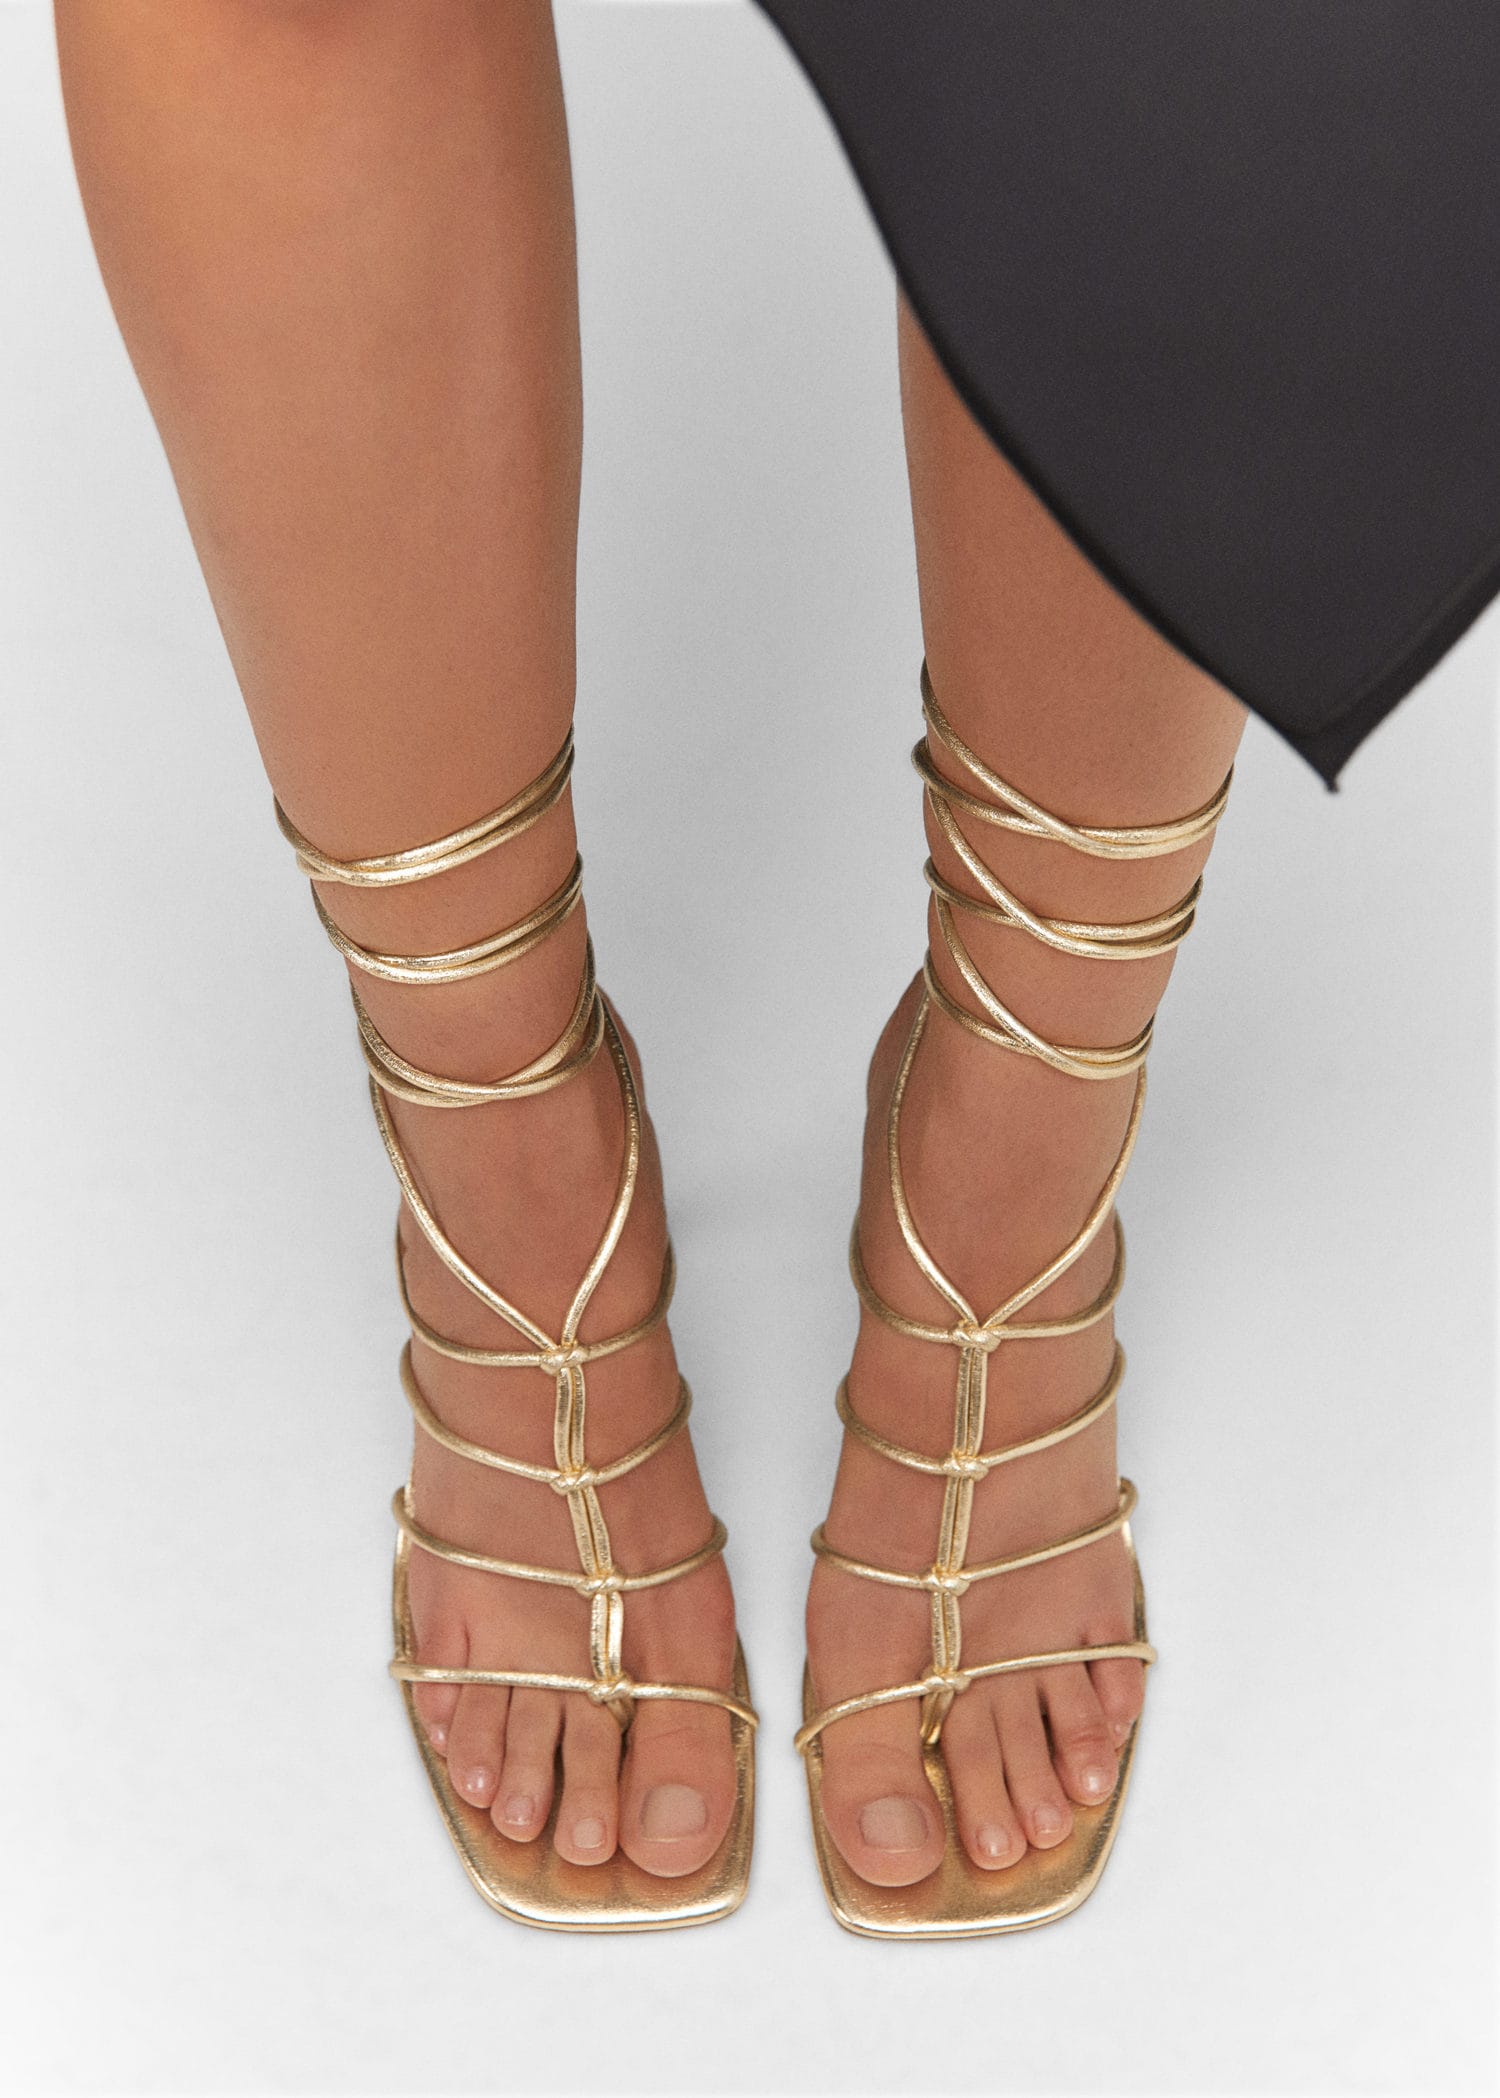 By Anthropologie Strappy Heels | Anthropologie